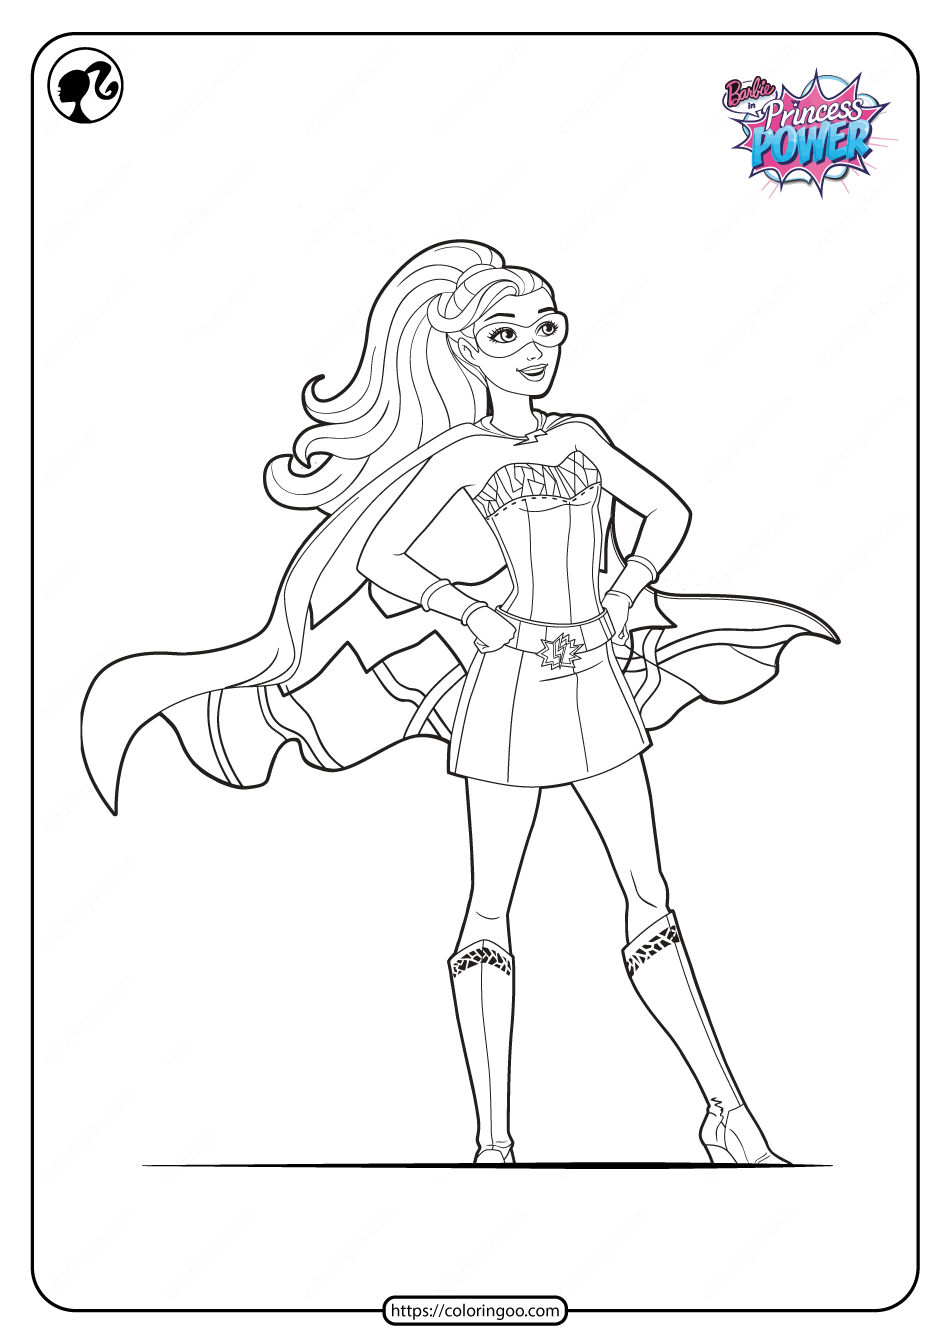 printable barbie in princess power coloring pages